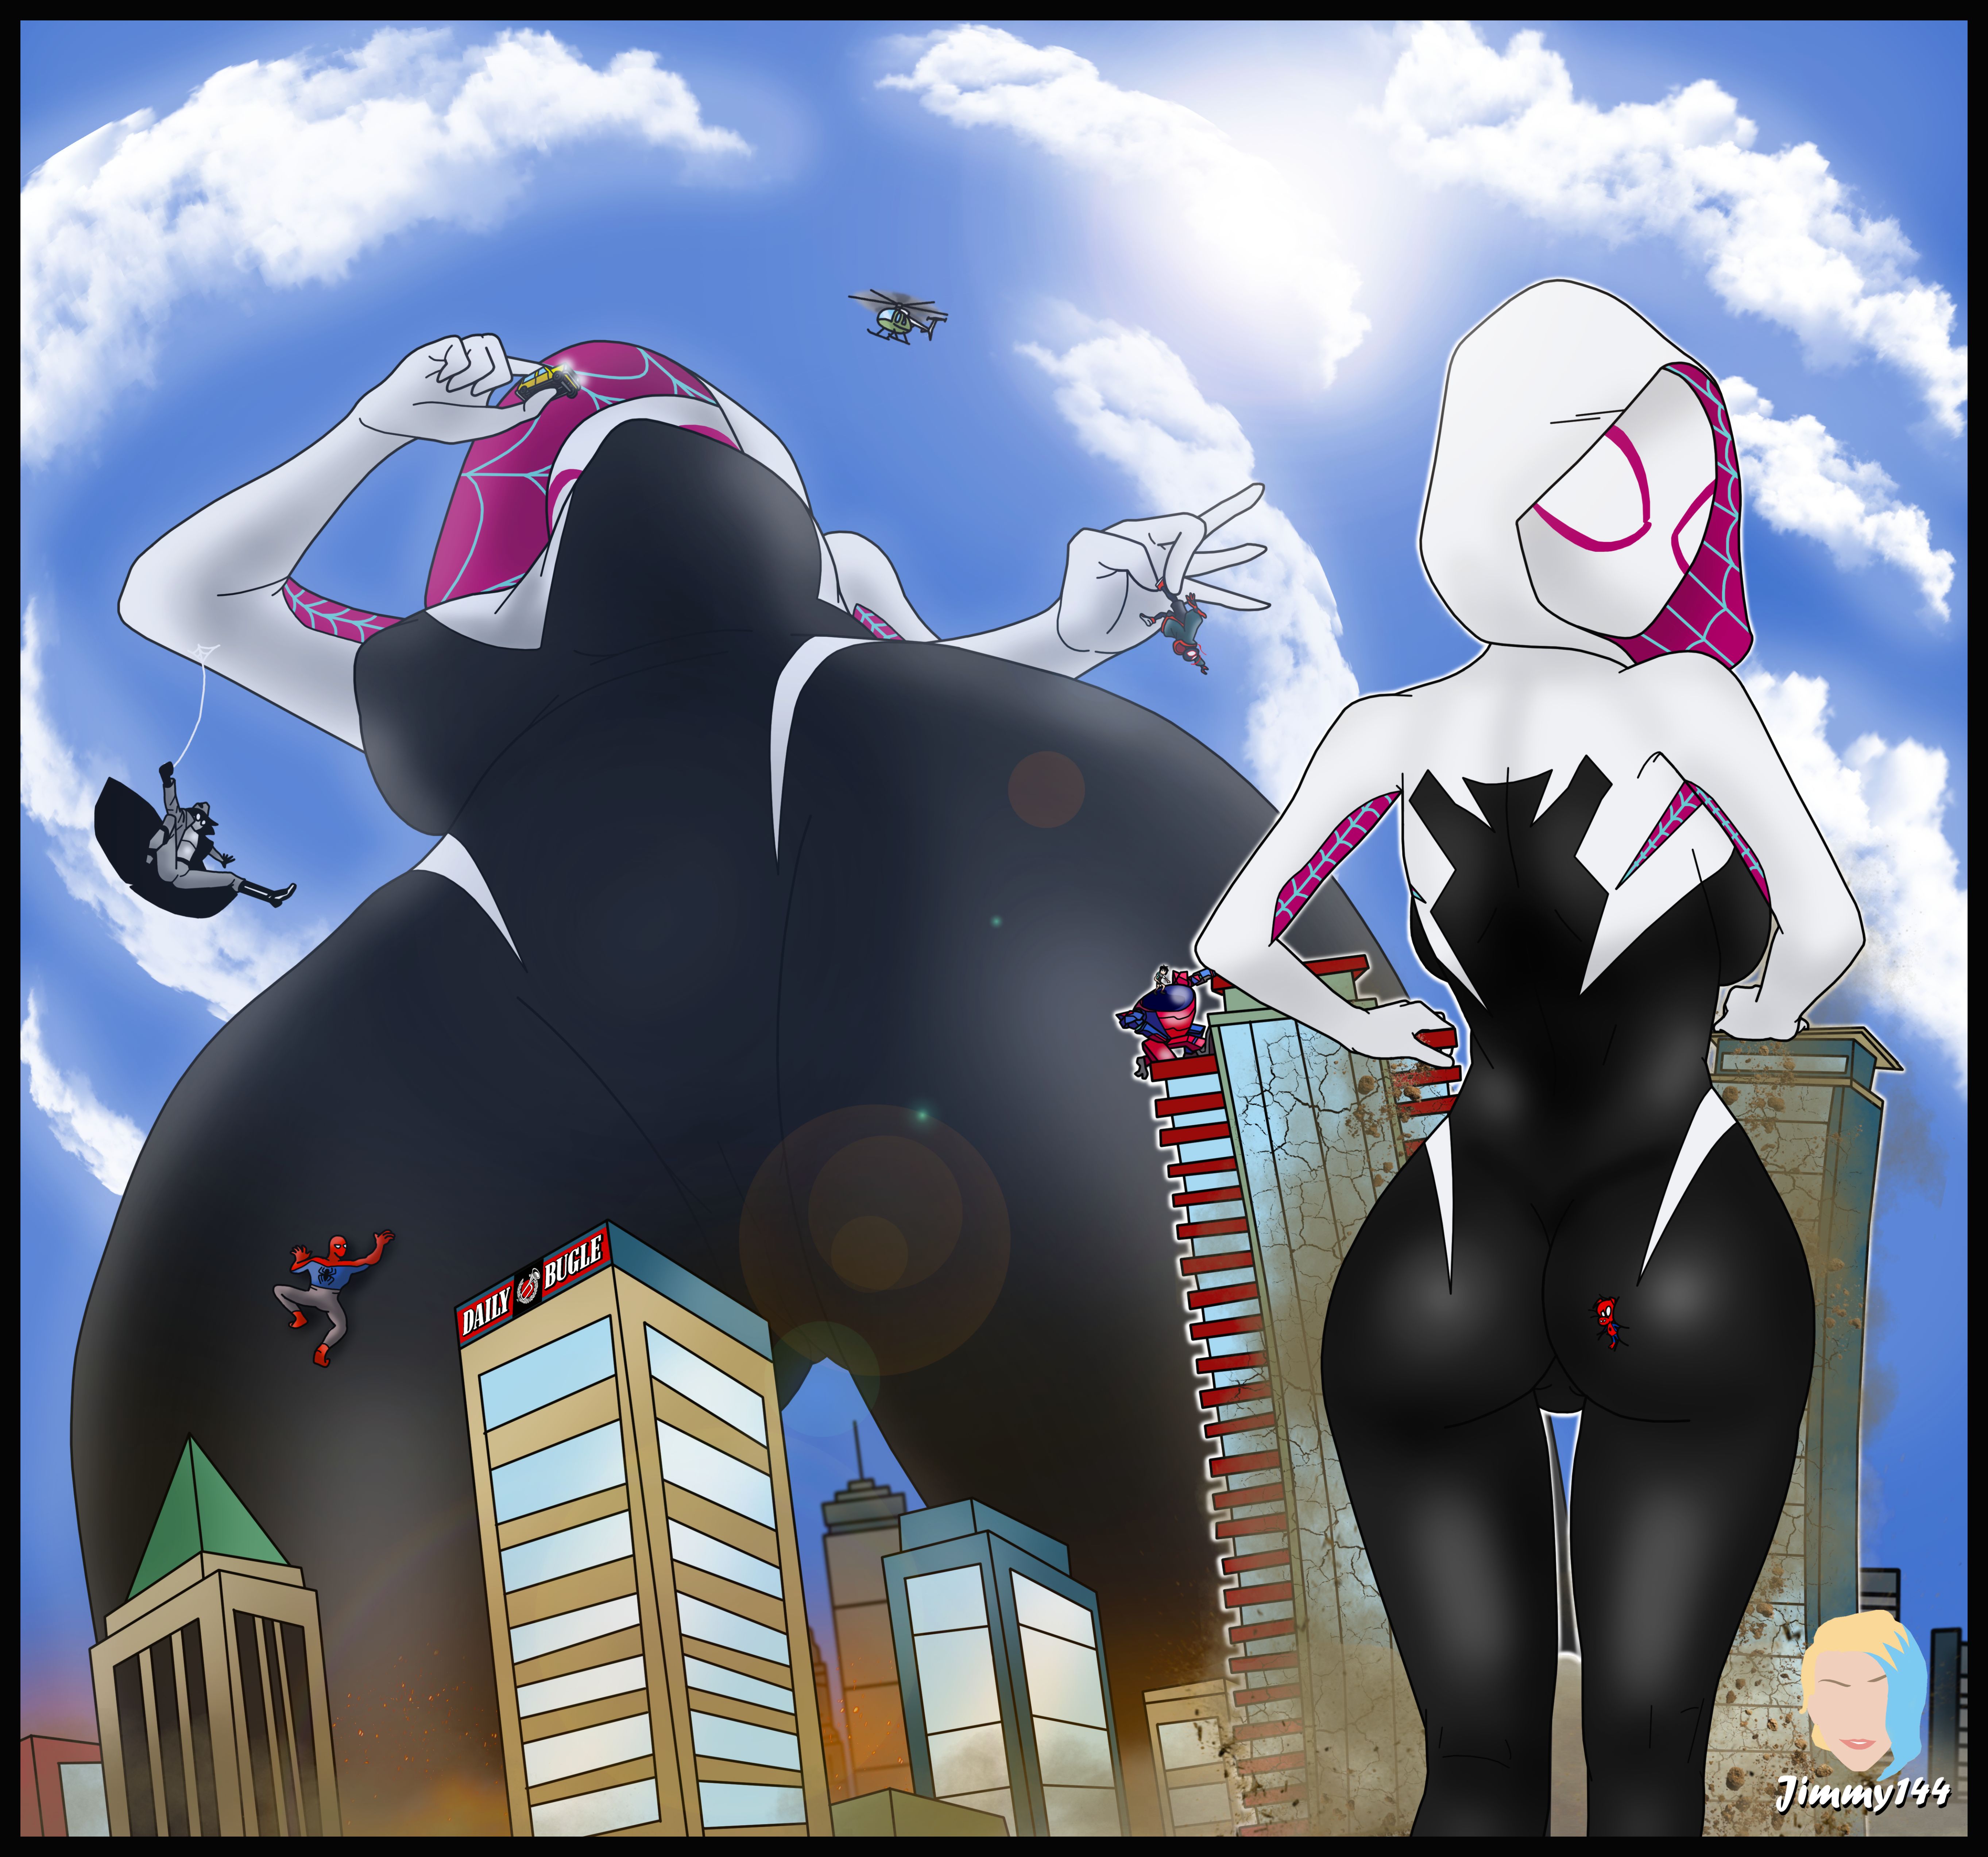 Spider-Gwen towering over.